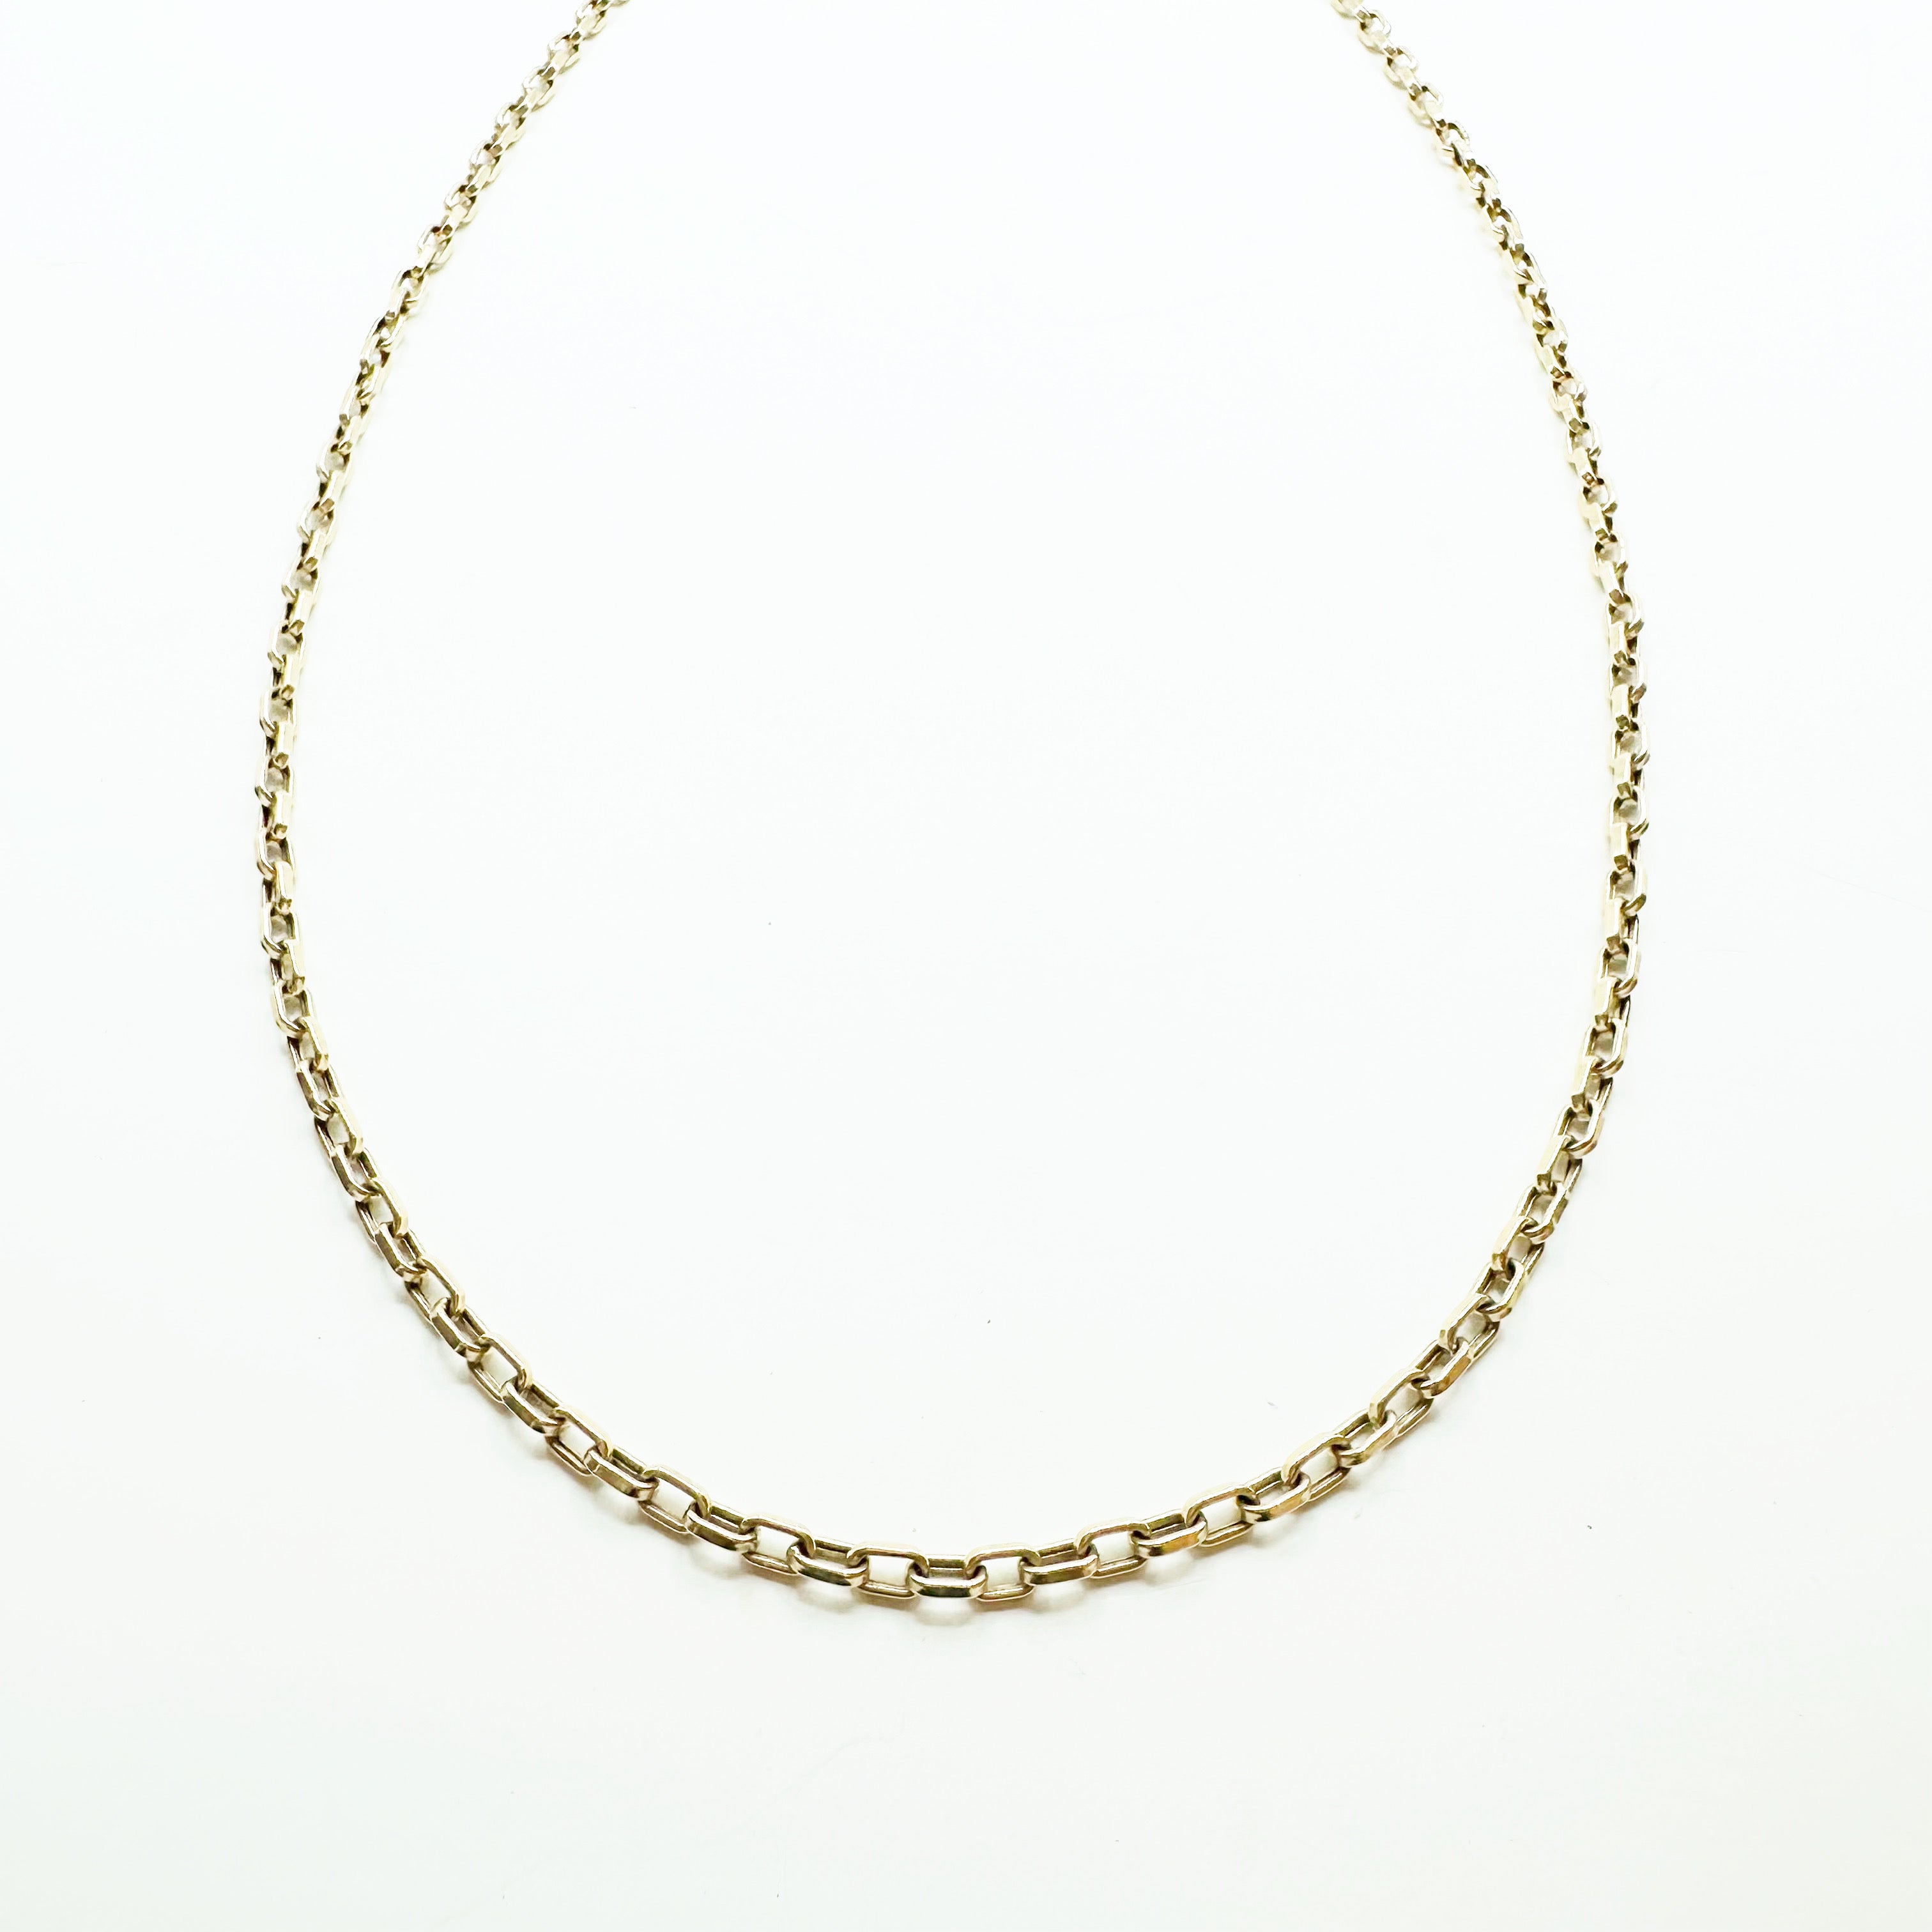 14K GOLD LINK CHAIN 32”